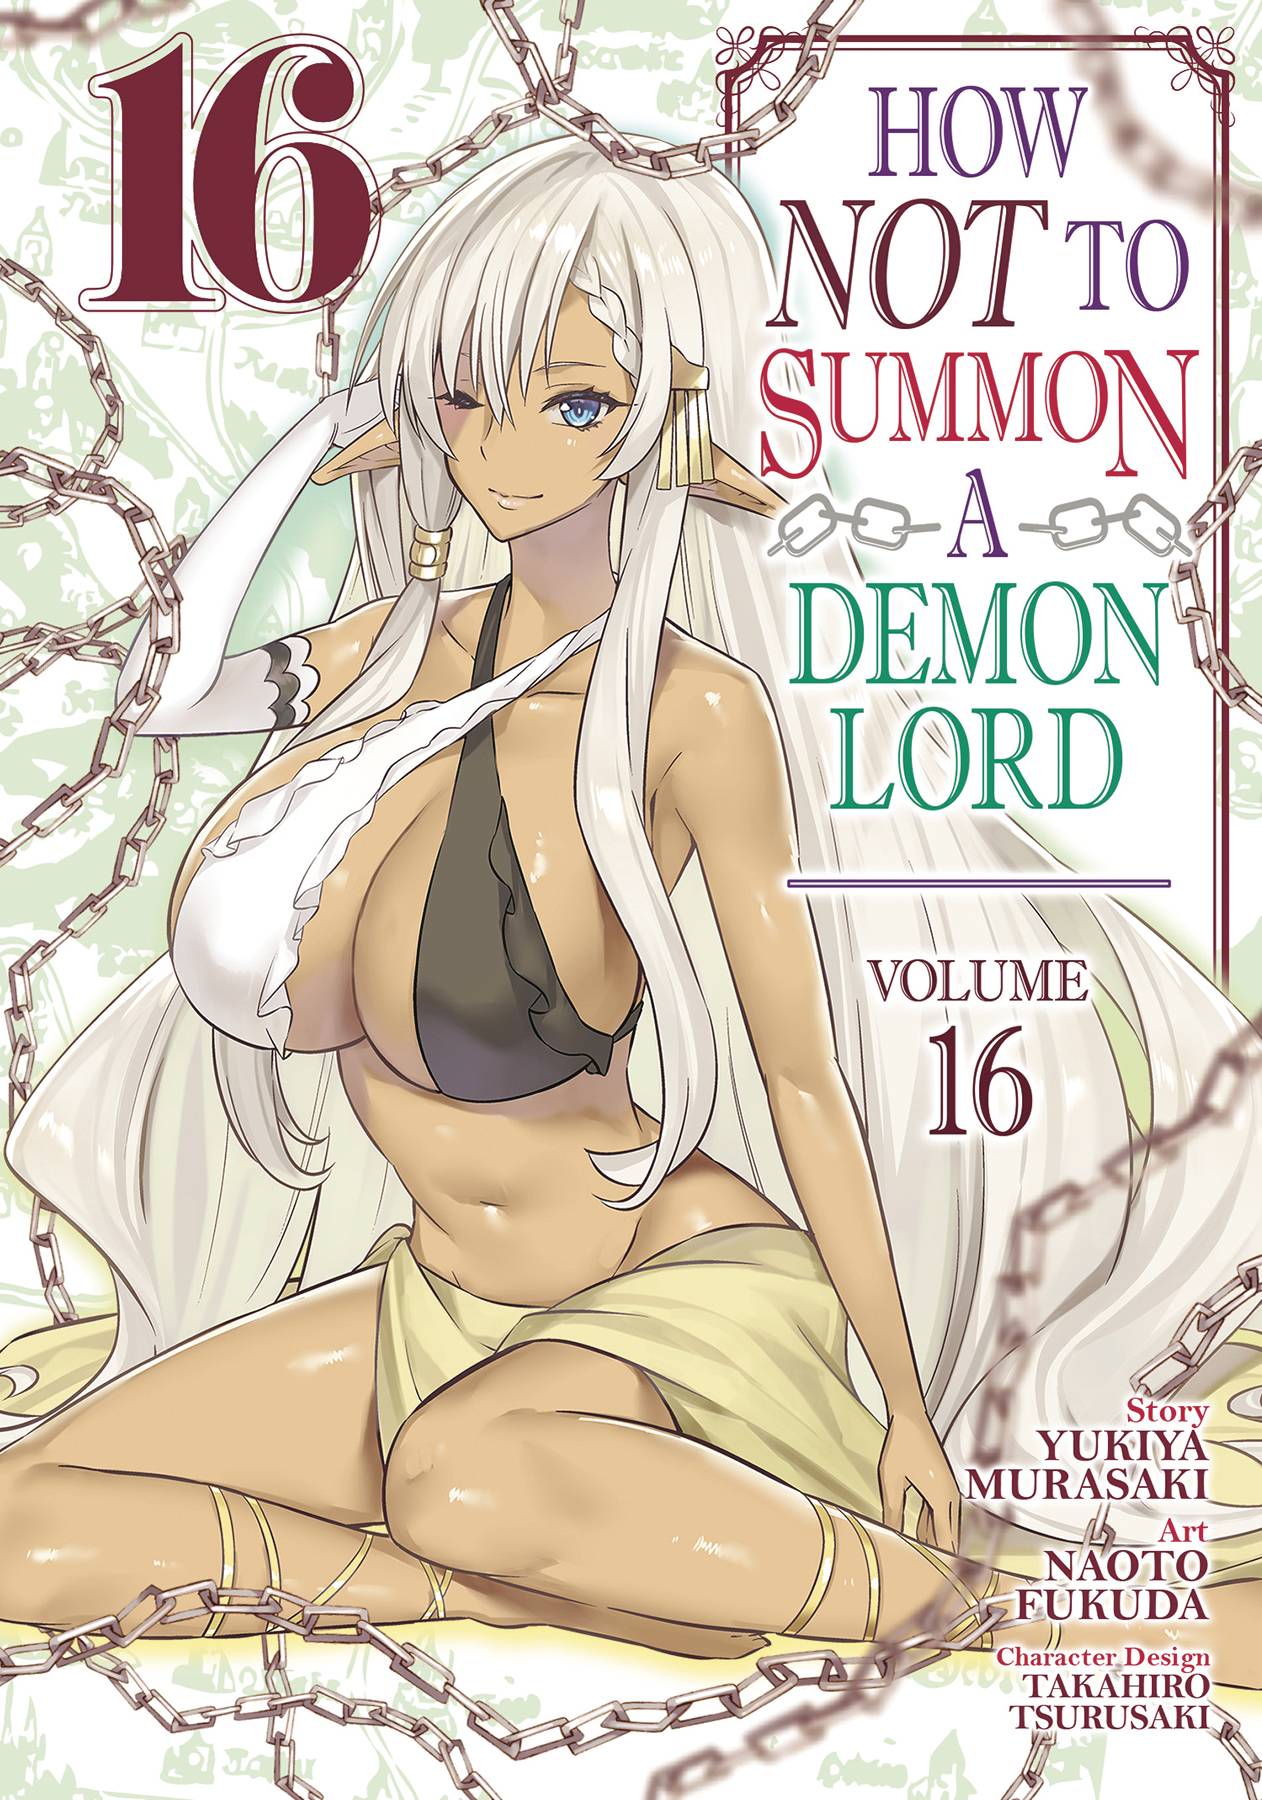 HOW NOT TO SUMMON DEMON LORD GN VOL 16 (MR)